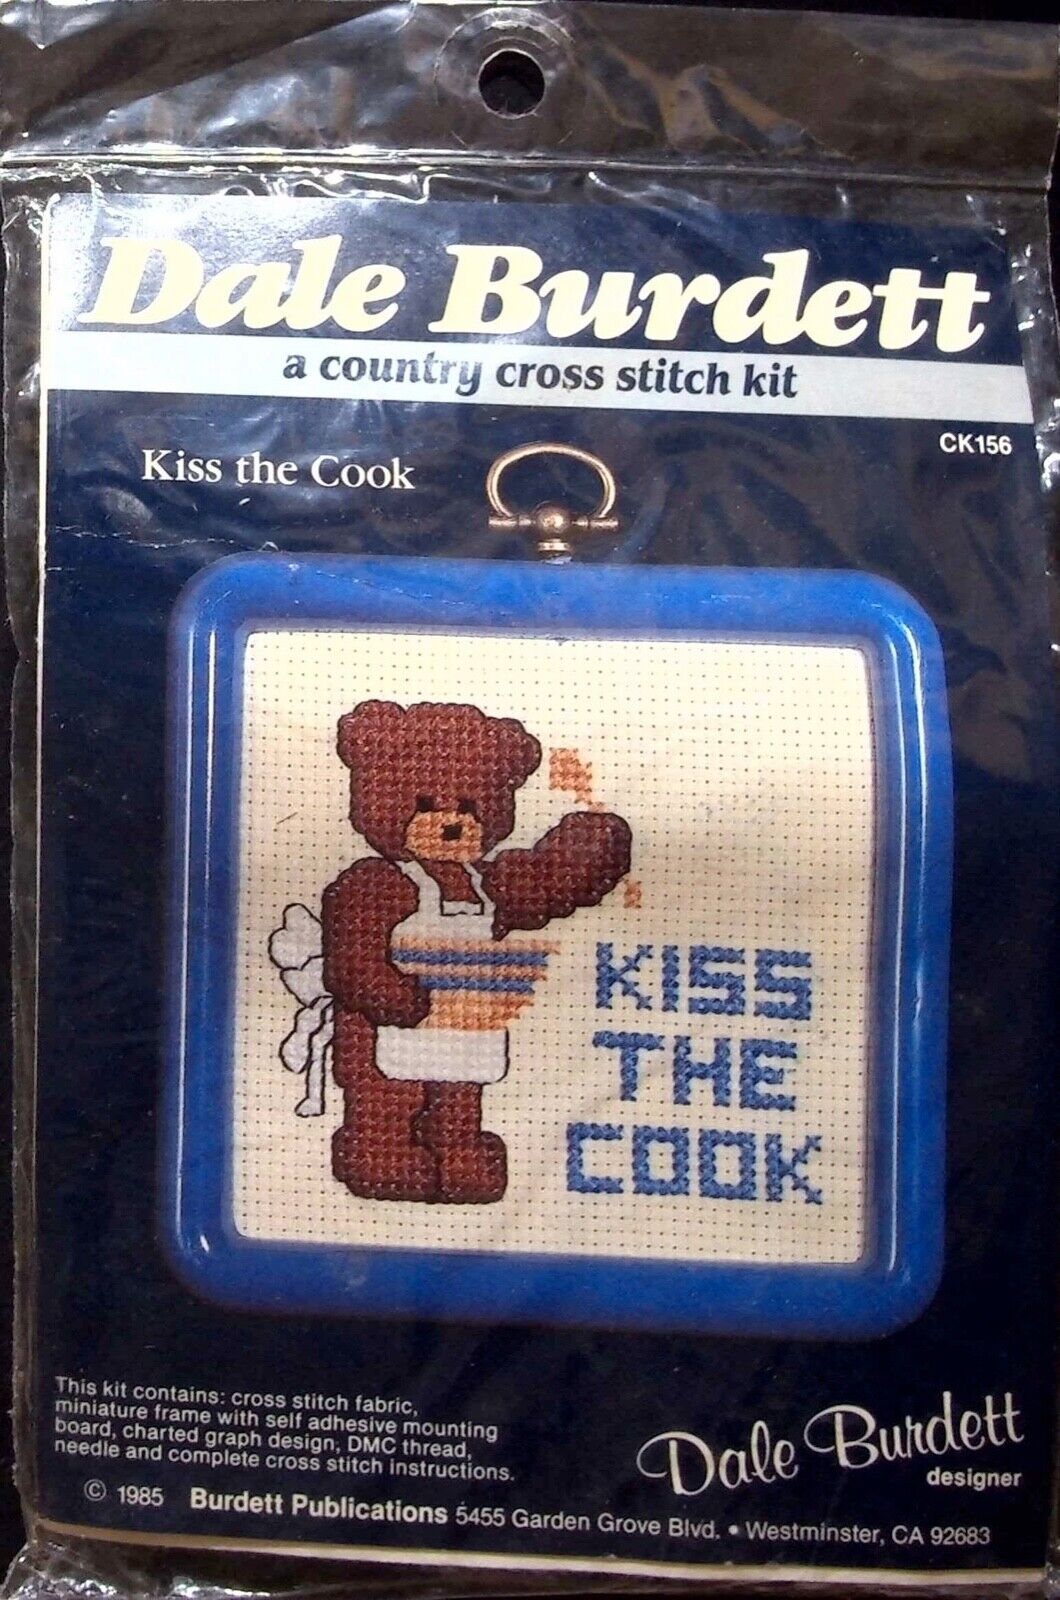 1985 VINTAGE DALE BURDETT A COUNTRY CROSS STITCH, CK156 KISS THE COOK